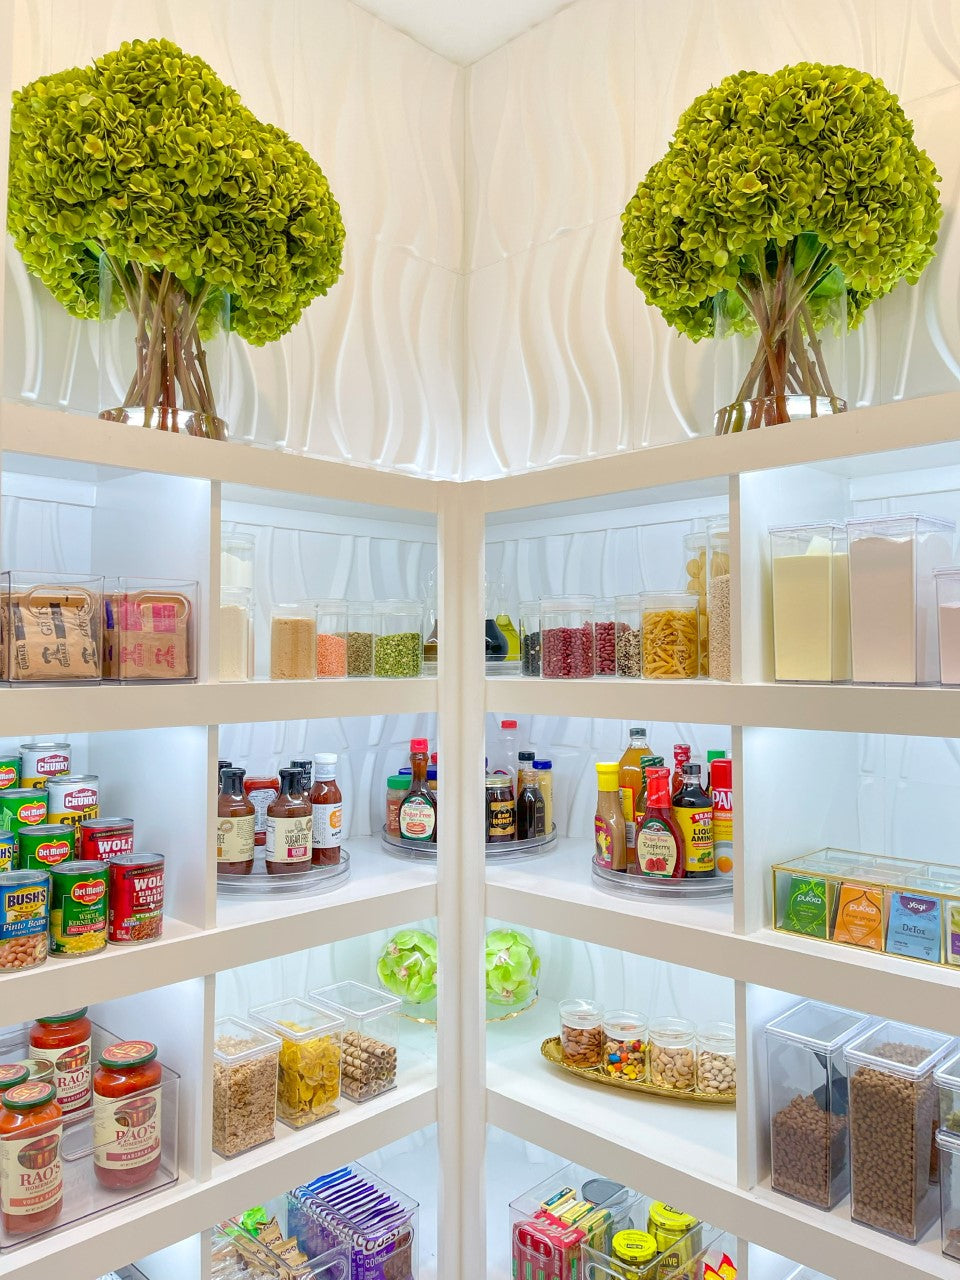 Pantry Tips With The Organizing Genius – The Home Edit